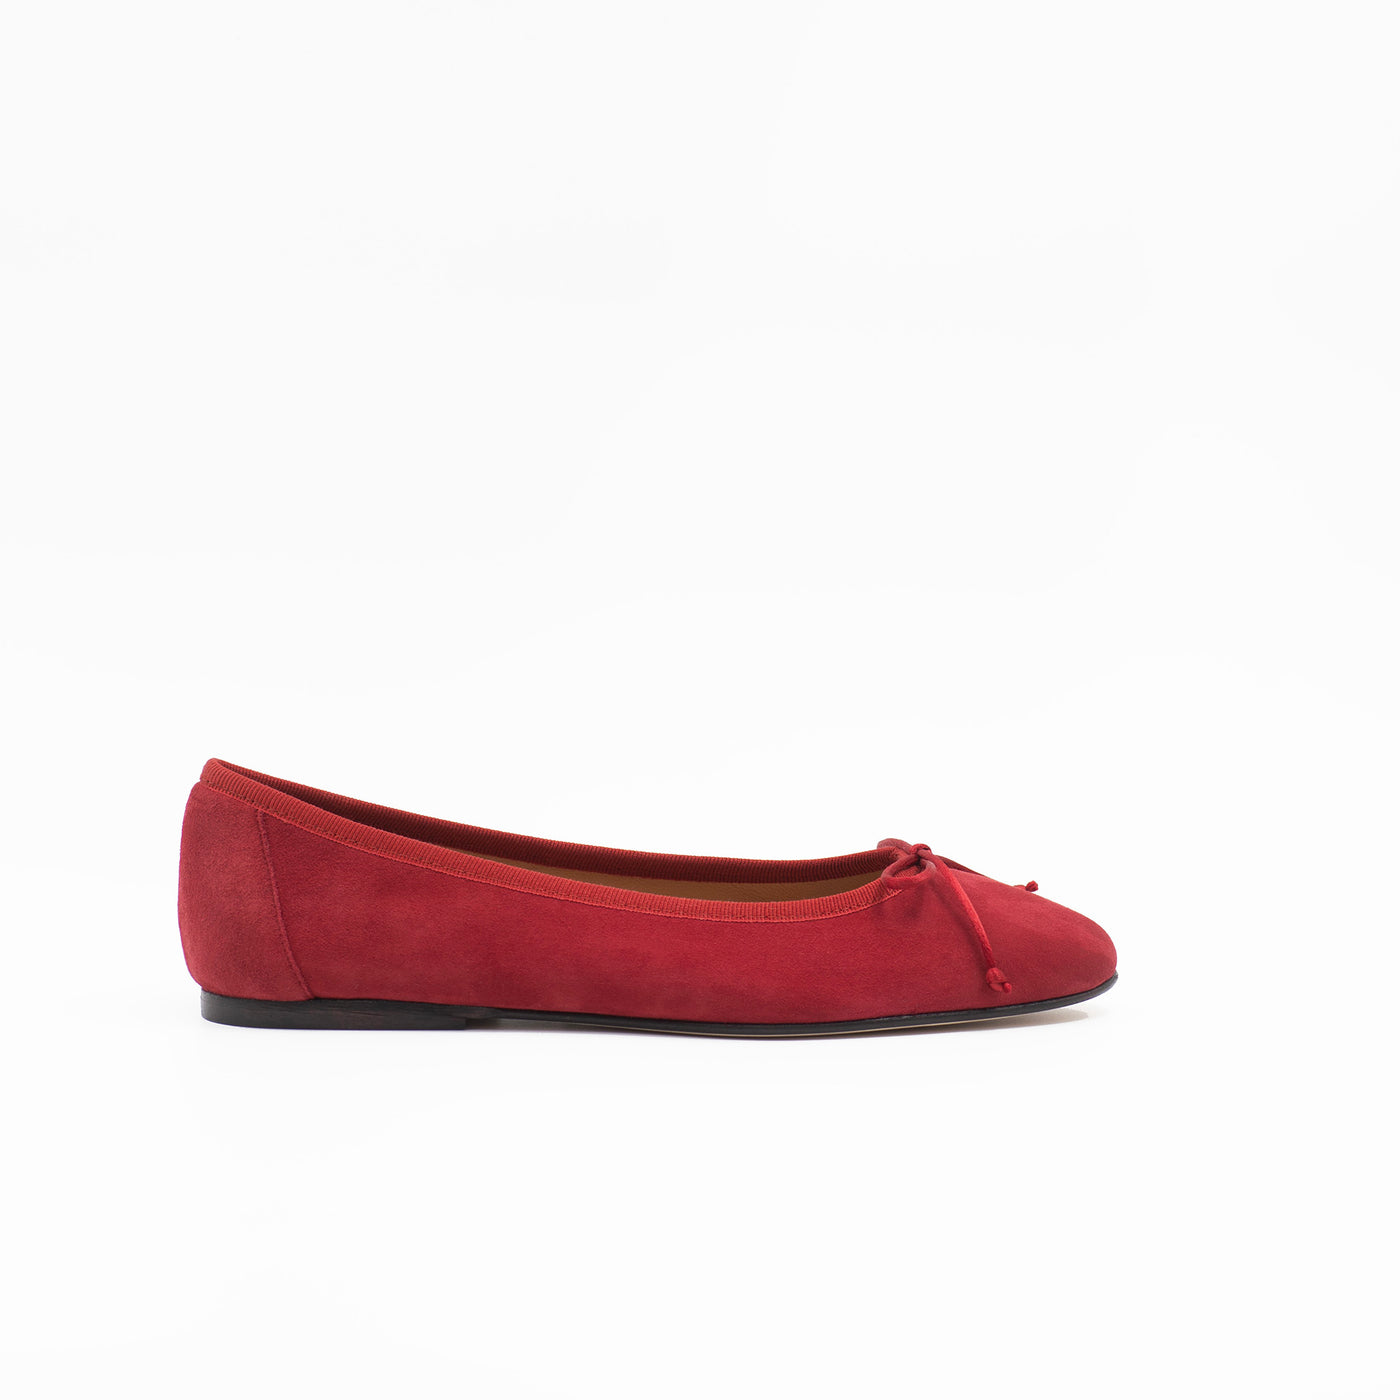 Scala in Red Suede